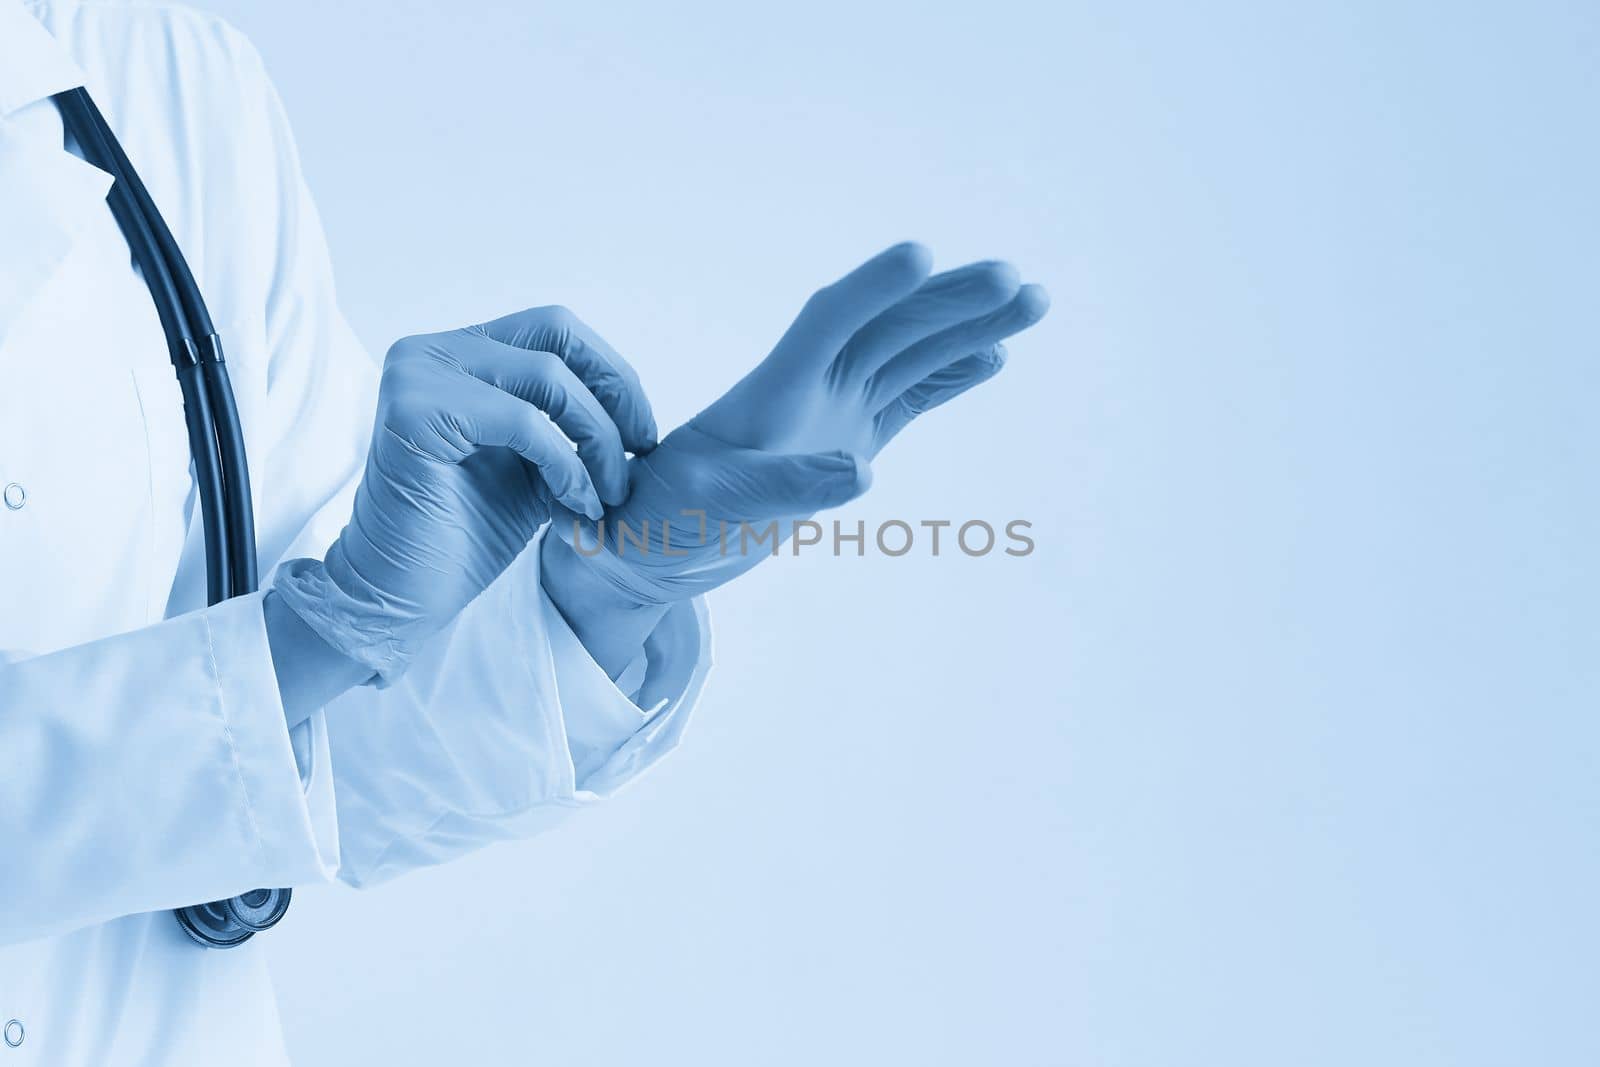 Young doctor putting on surgical gloves over white background by Mariakray